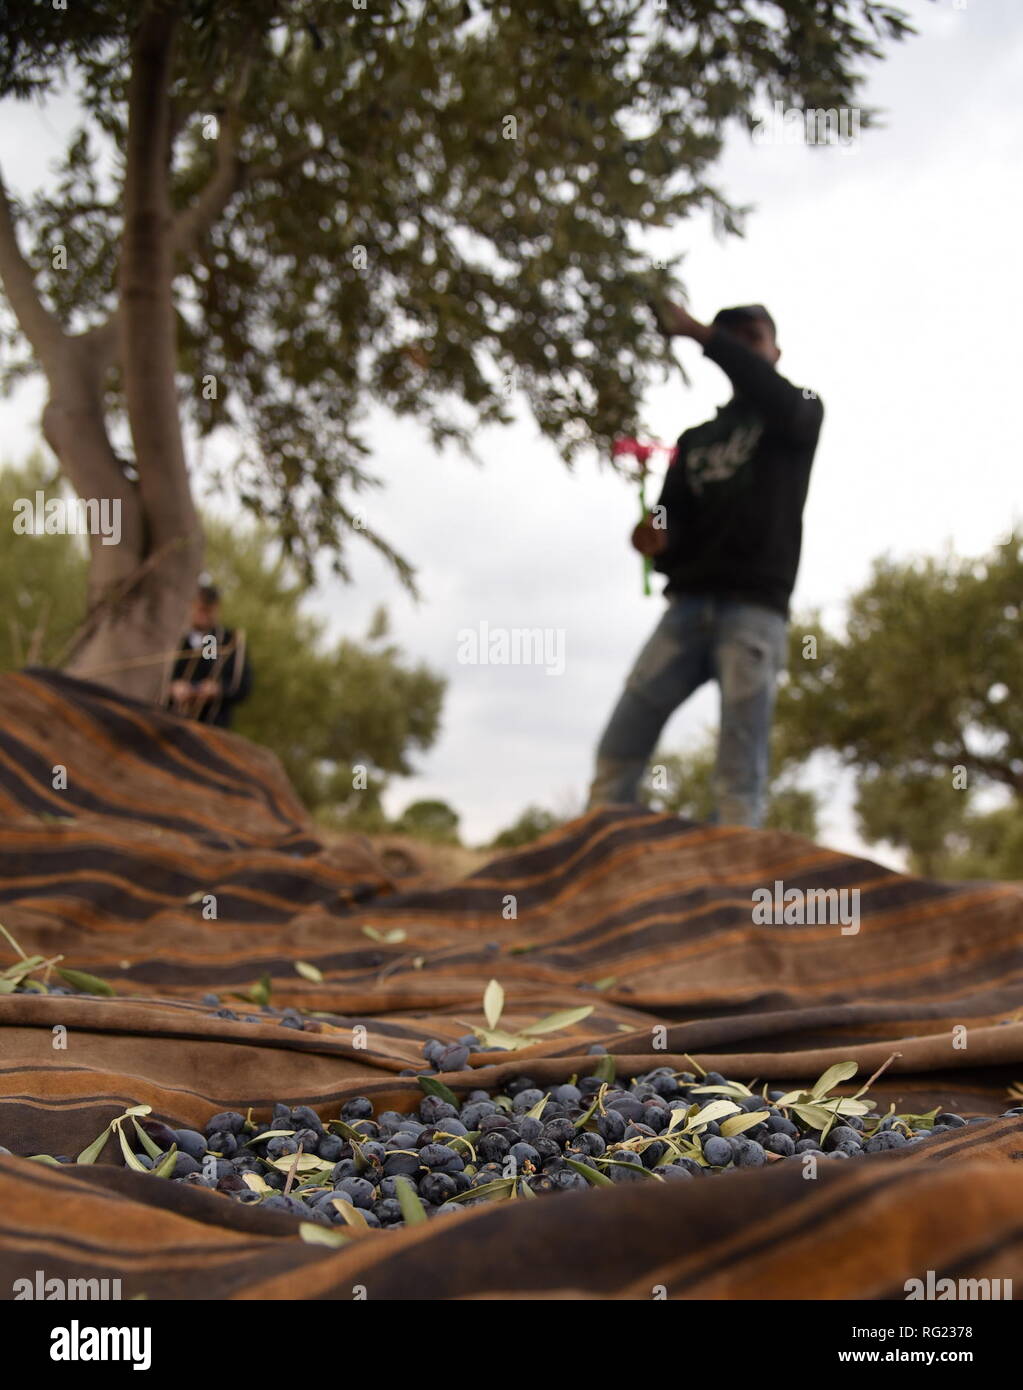 190127) -- SWEIDA, Jan. 27, 2019 (Xinhua) -- A Syrian farmer collects  olives off an olive tree in a grove in the countryside of Sweida province,  Syria, Nov. 13, 2018. The production